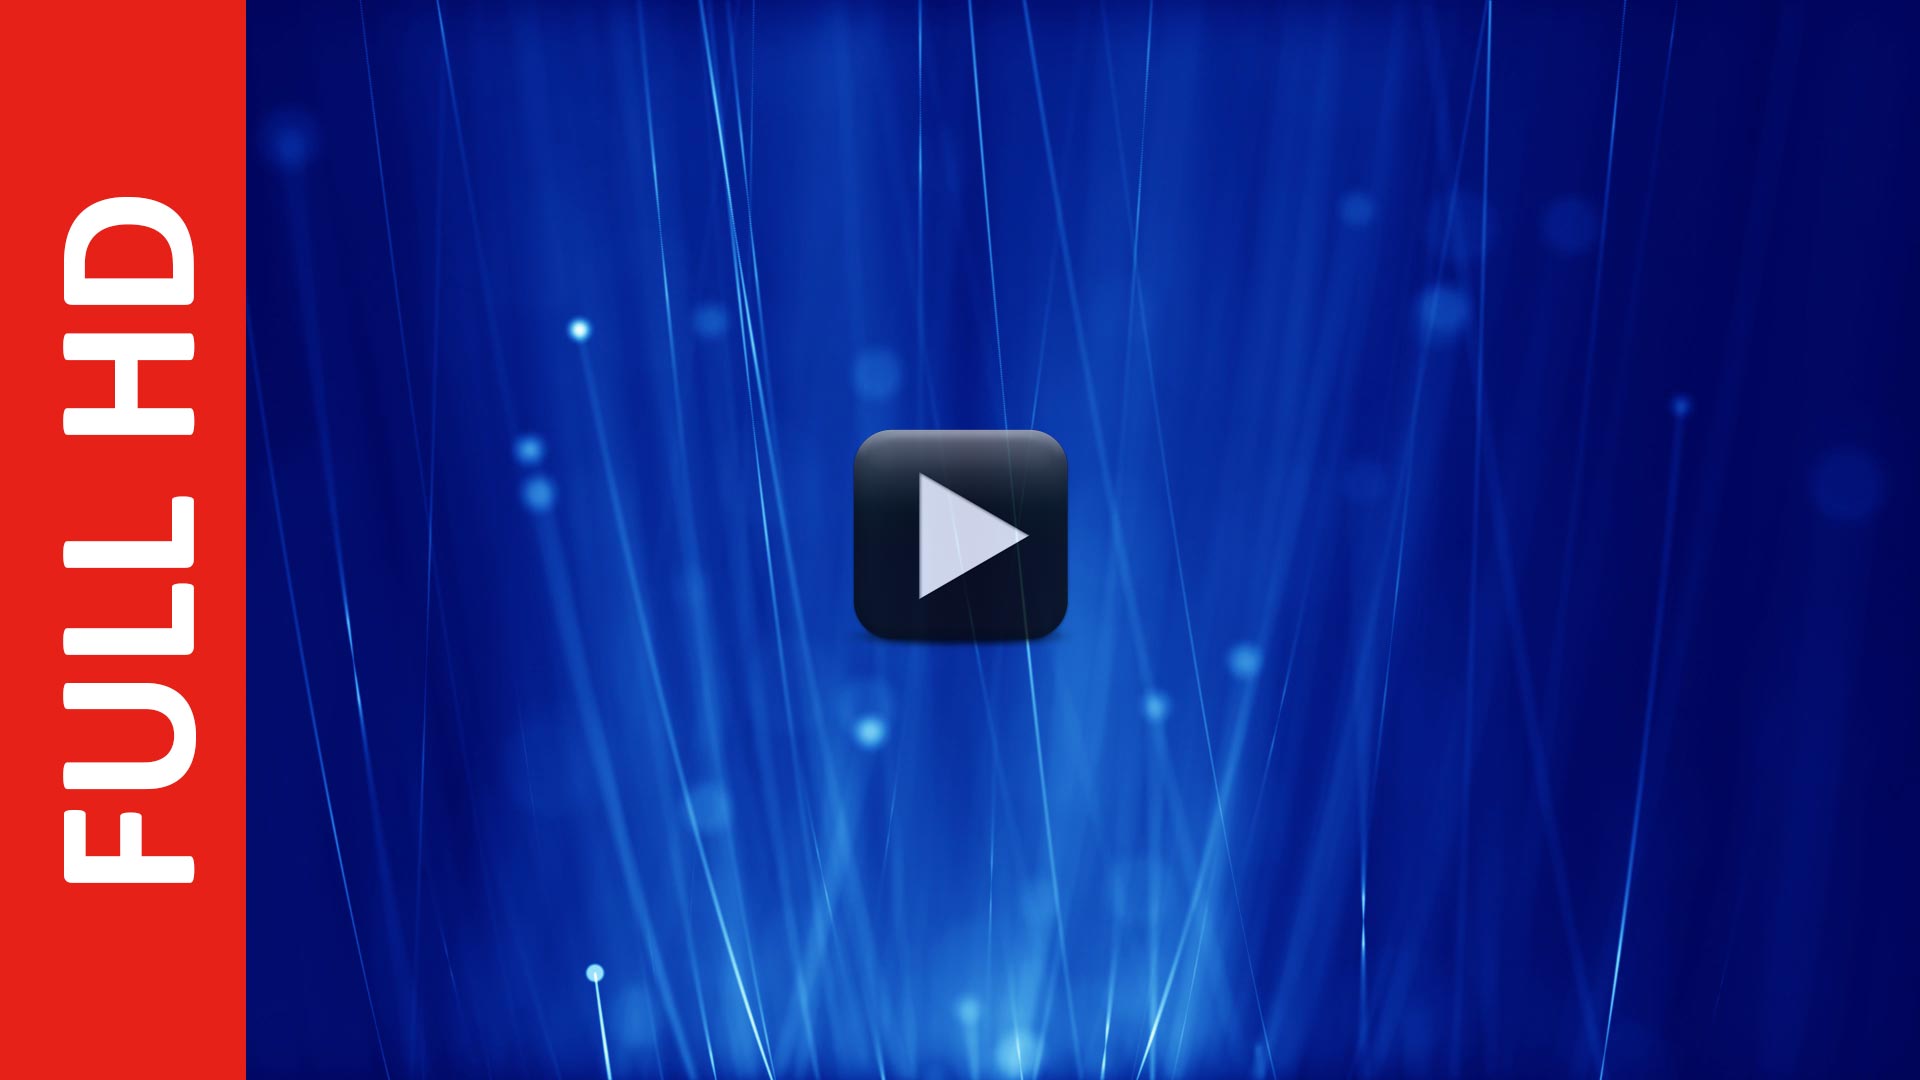 Beautiful Magical Animated Wallpaper Background Video Effect 1080p | All  Design Creative